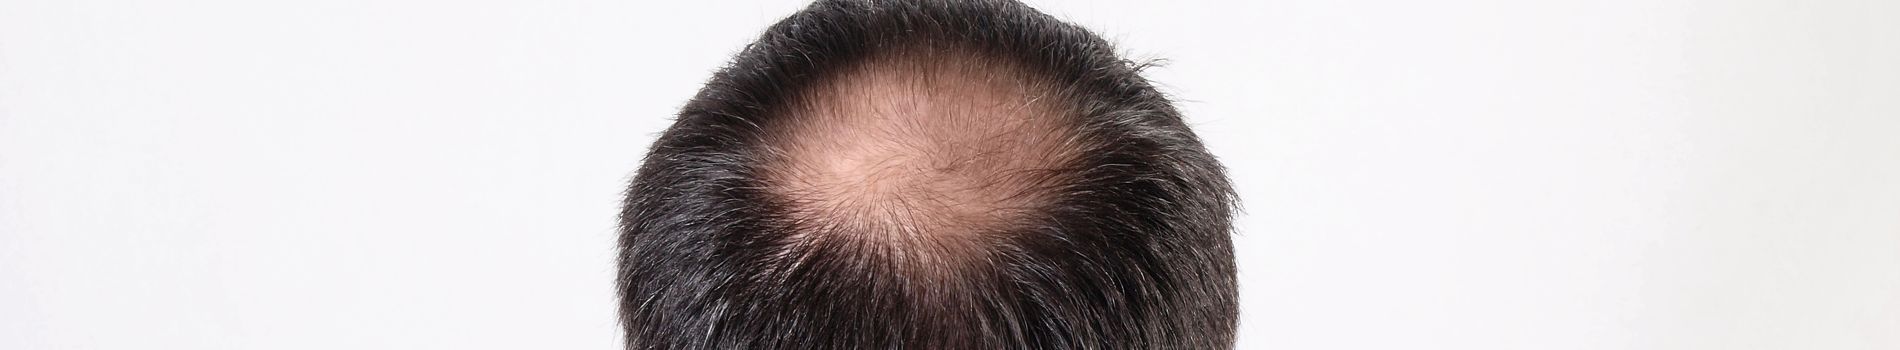 Does iodine affect hair loss